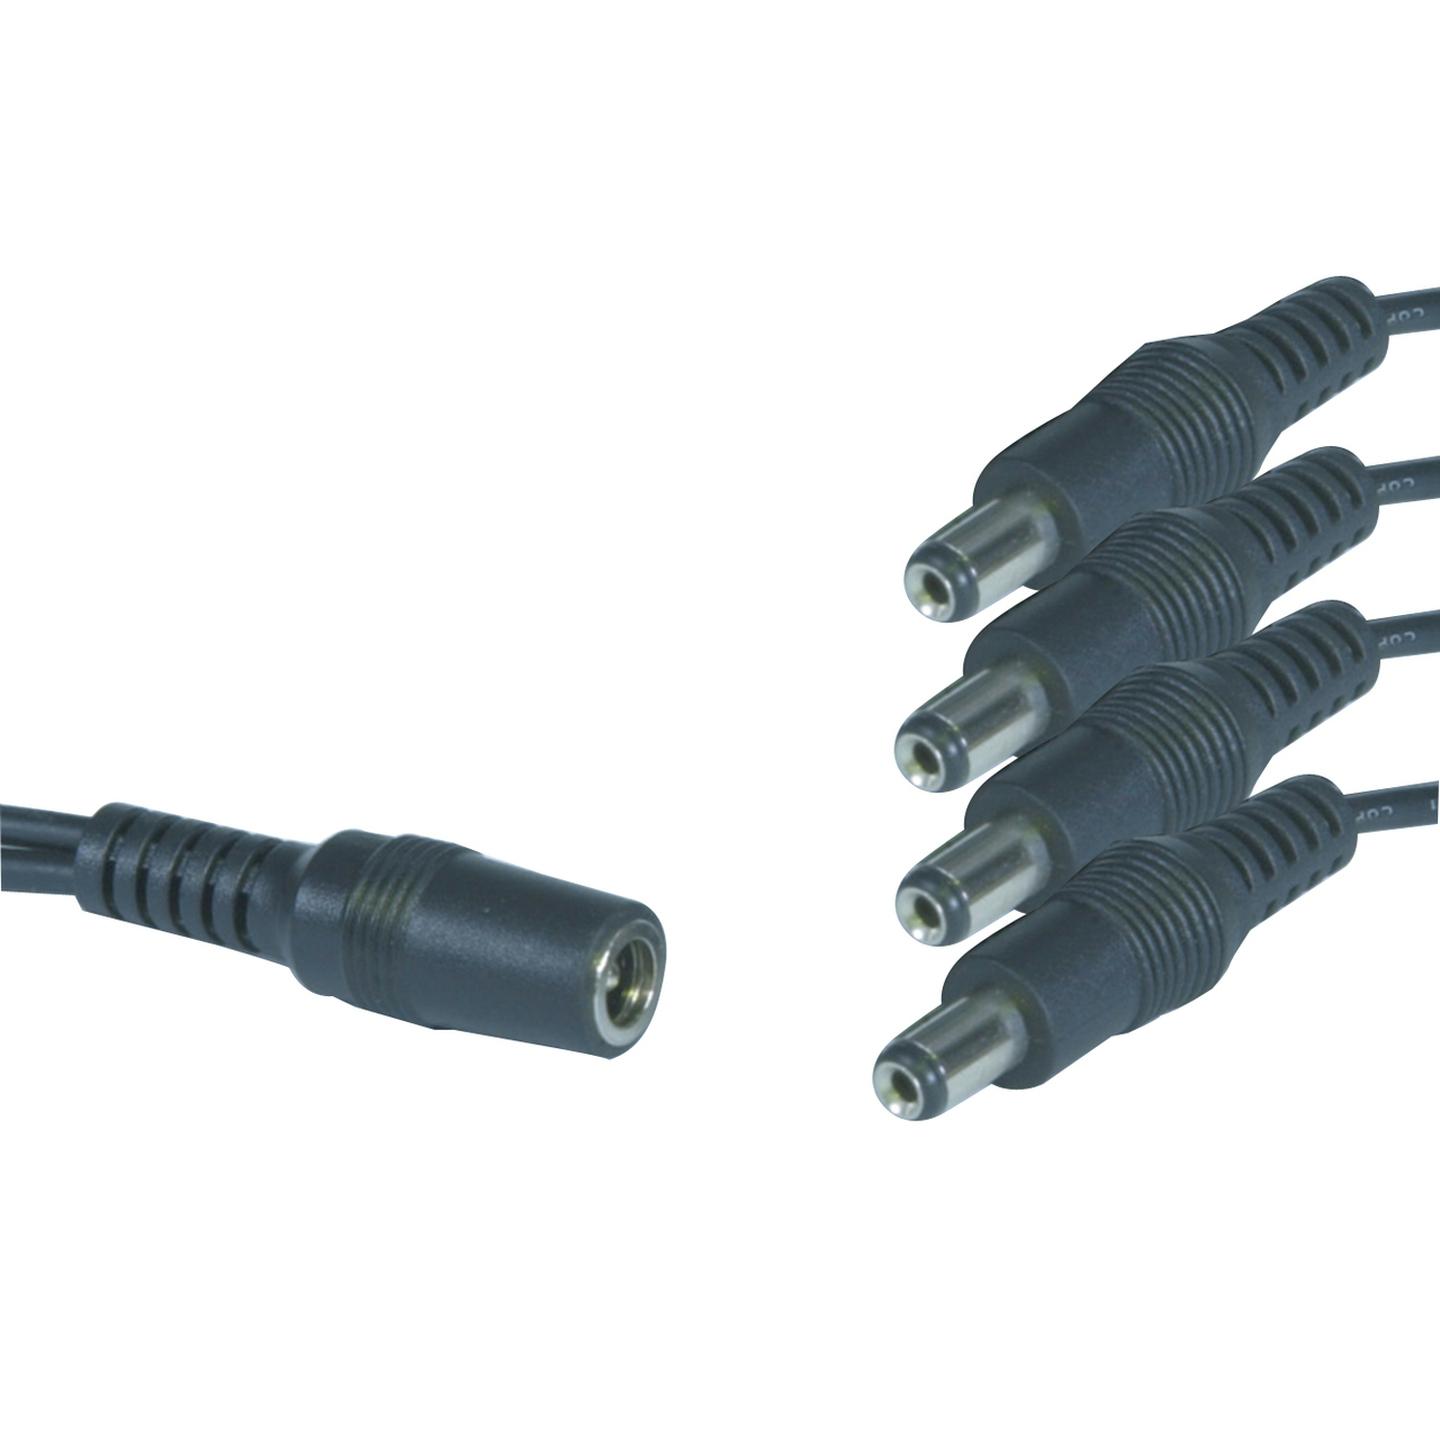 2.1mm DC Splitter Cable 1 Socket to 4 Plugs